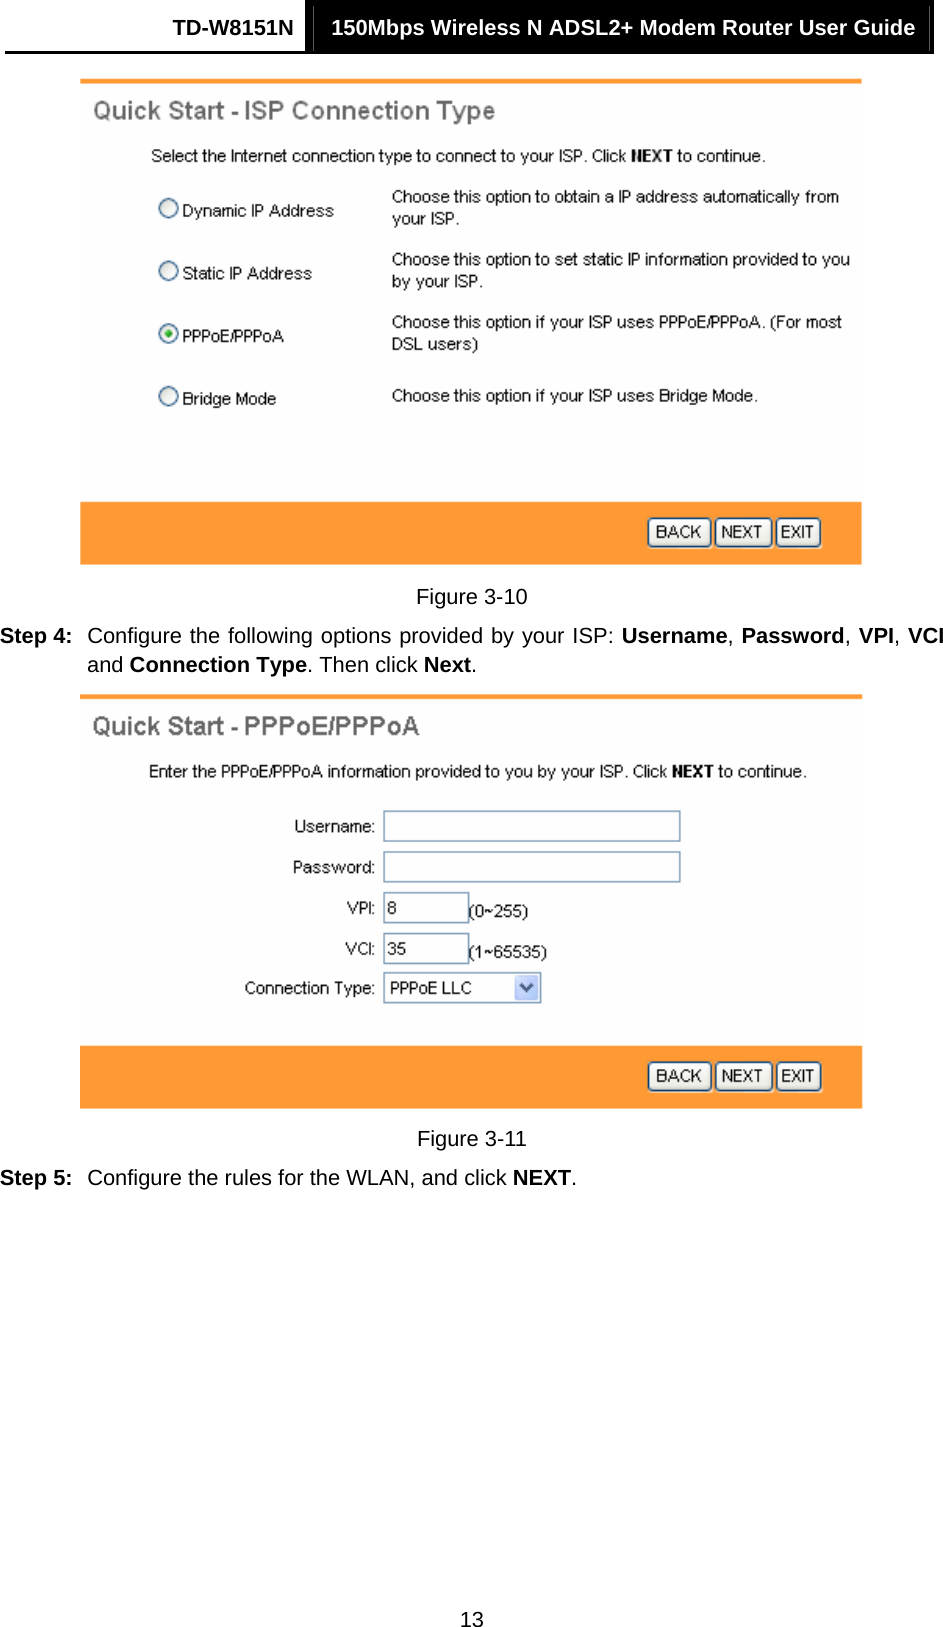 TD-W8151N  150Mbps Wireless N ADSL2+ Modem Router User Guide  13 Figure 3-10 Step 4:  Configure the following options provided by your ISP: Username, Password, VPI, VCI and Connection Type. Then click Next.  Figure 3-11 Step 5:  Configure the rules for the WLAN, and click NEXT. 